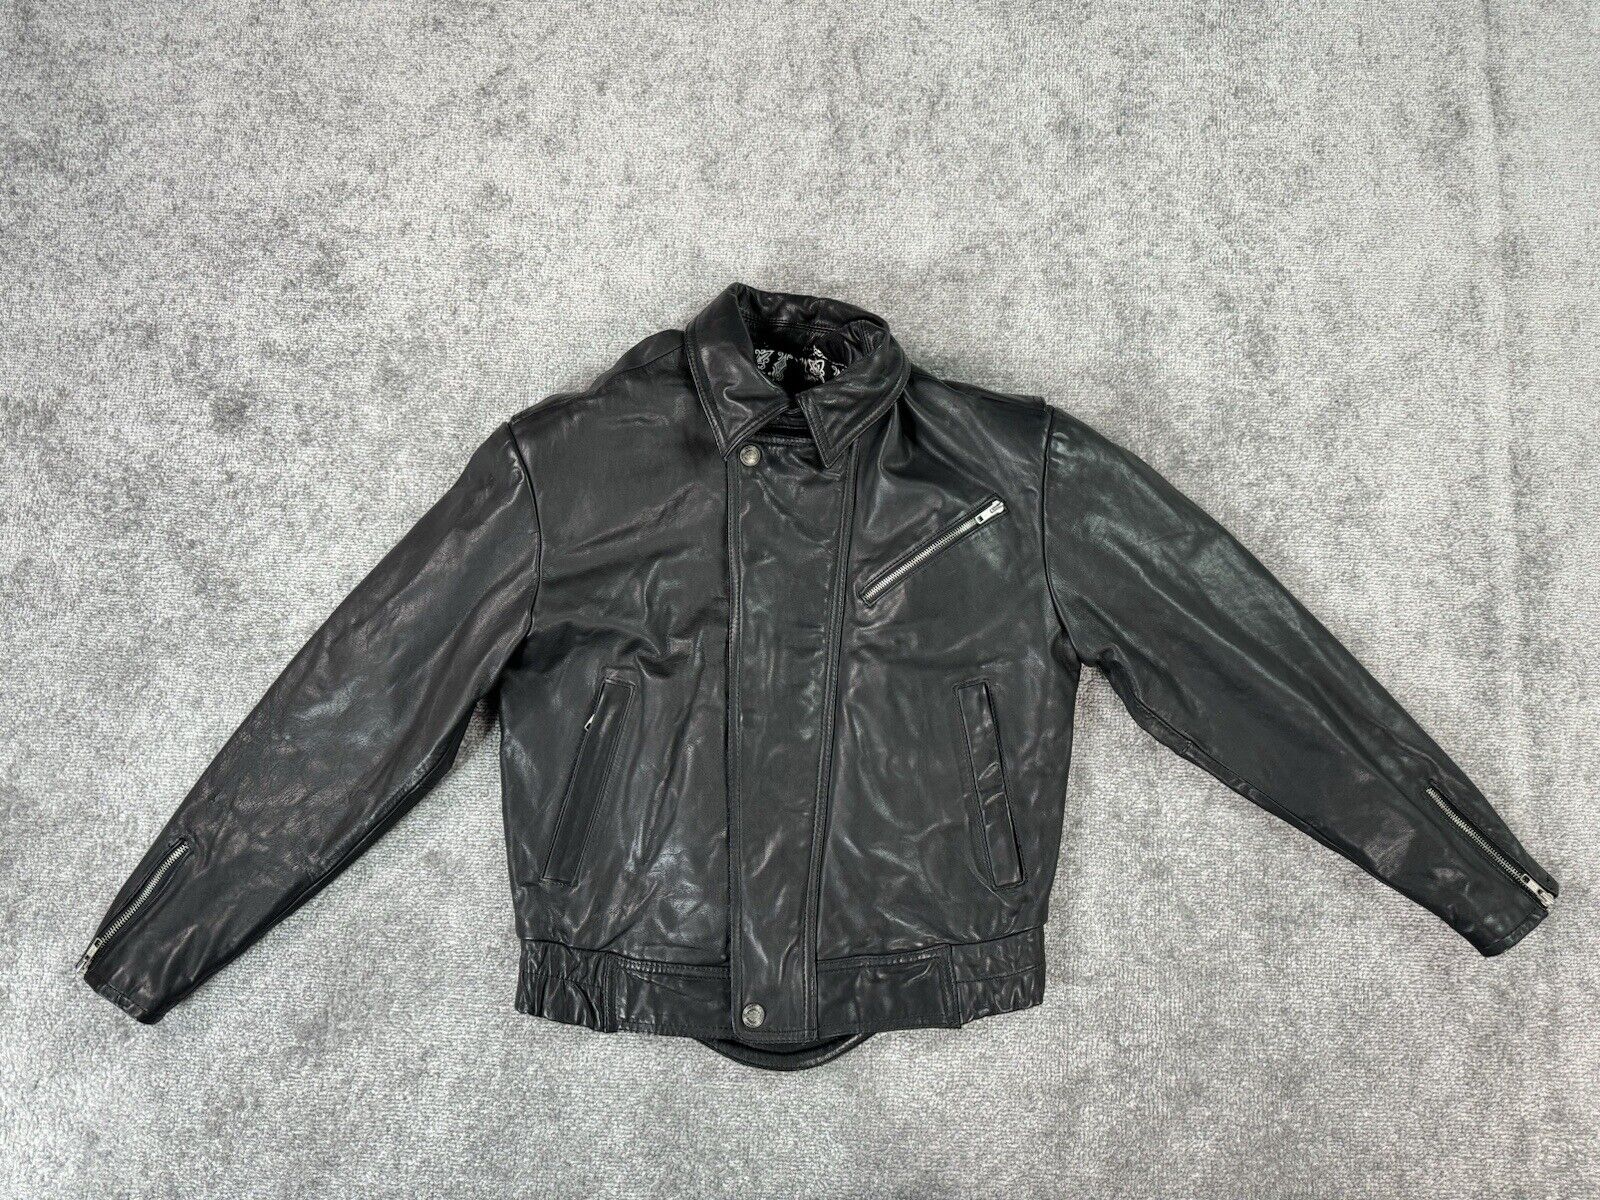 Harley Davidson Jacket Men Small Black Heavy Leather Motorcycle Embroidered Logo